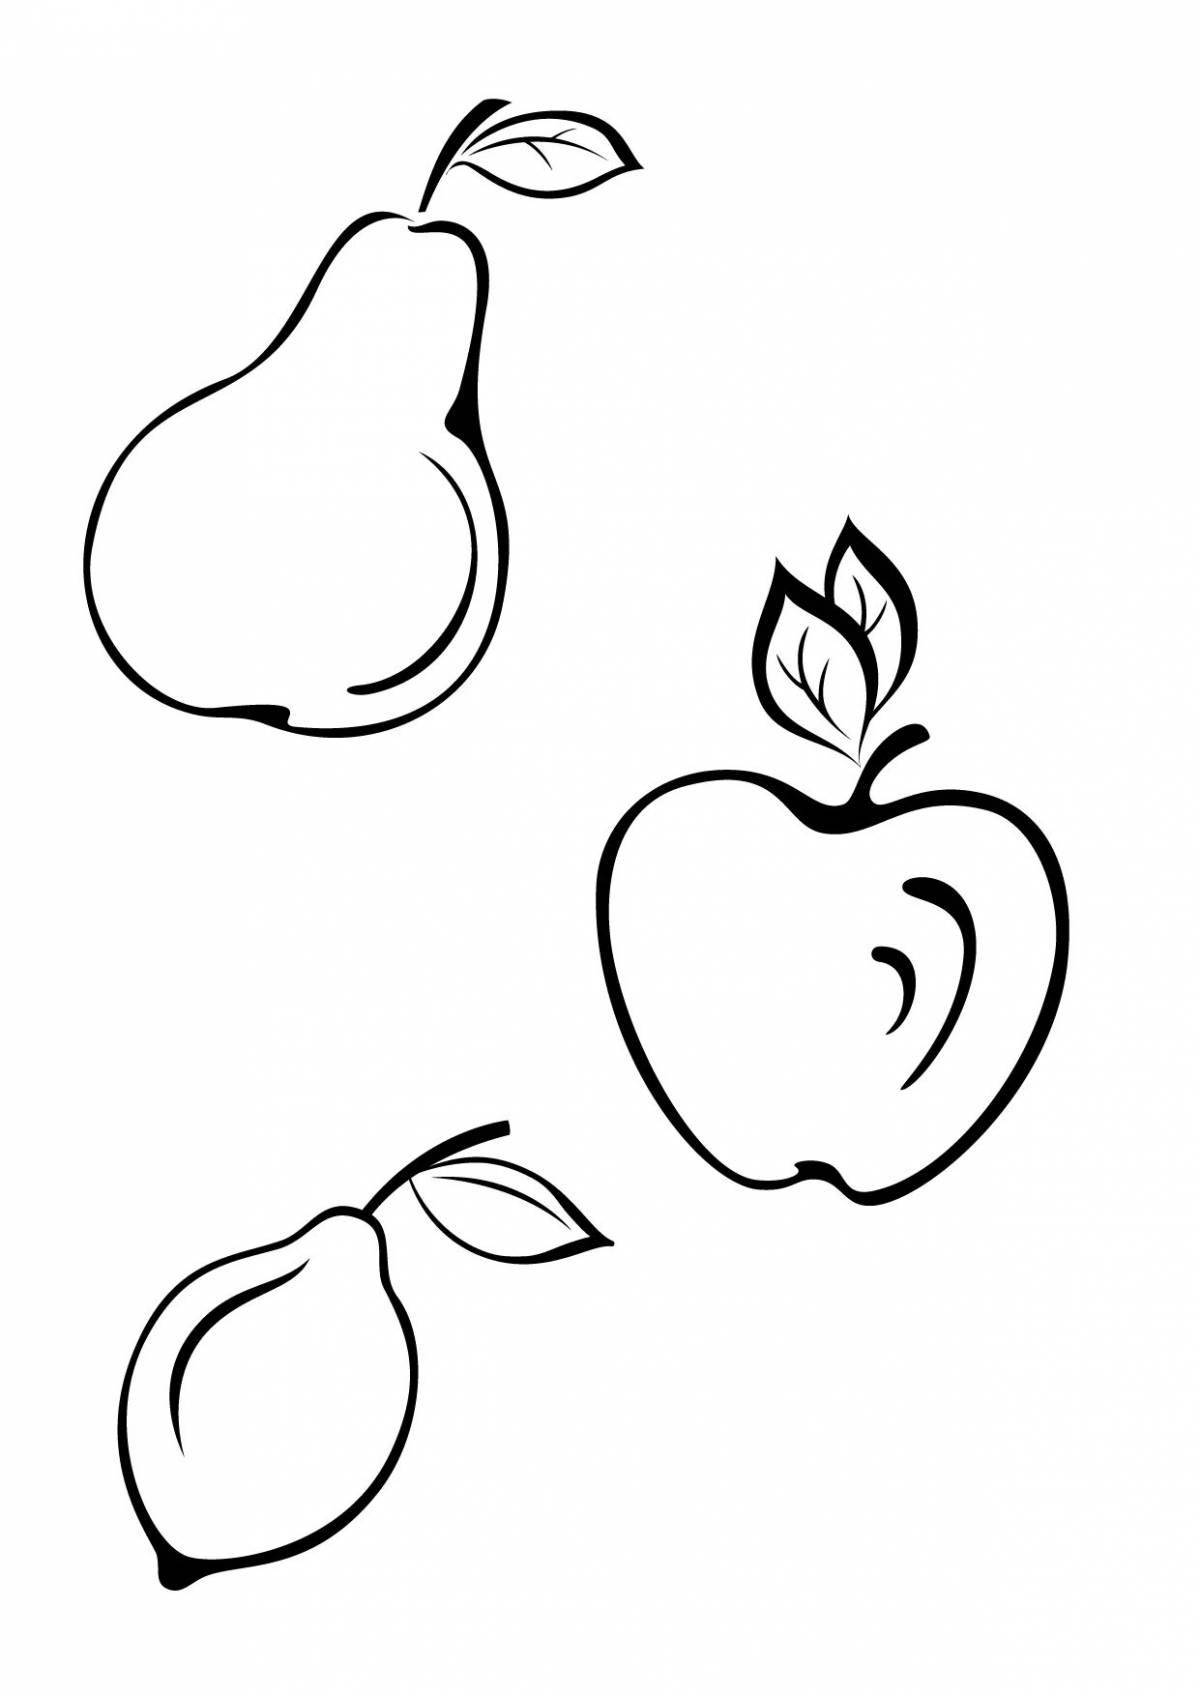 Adorable apple pear coloring page